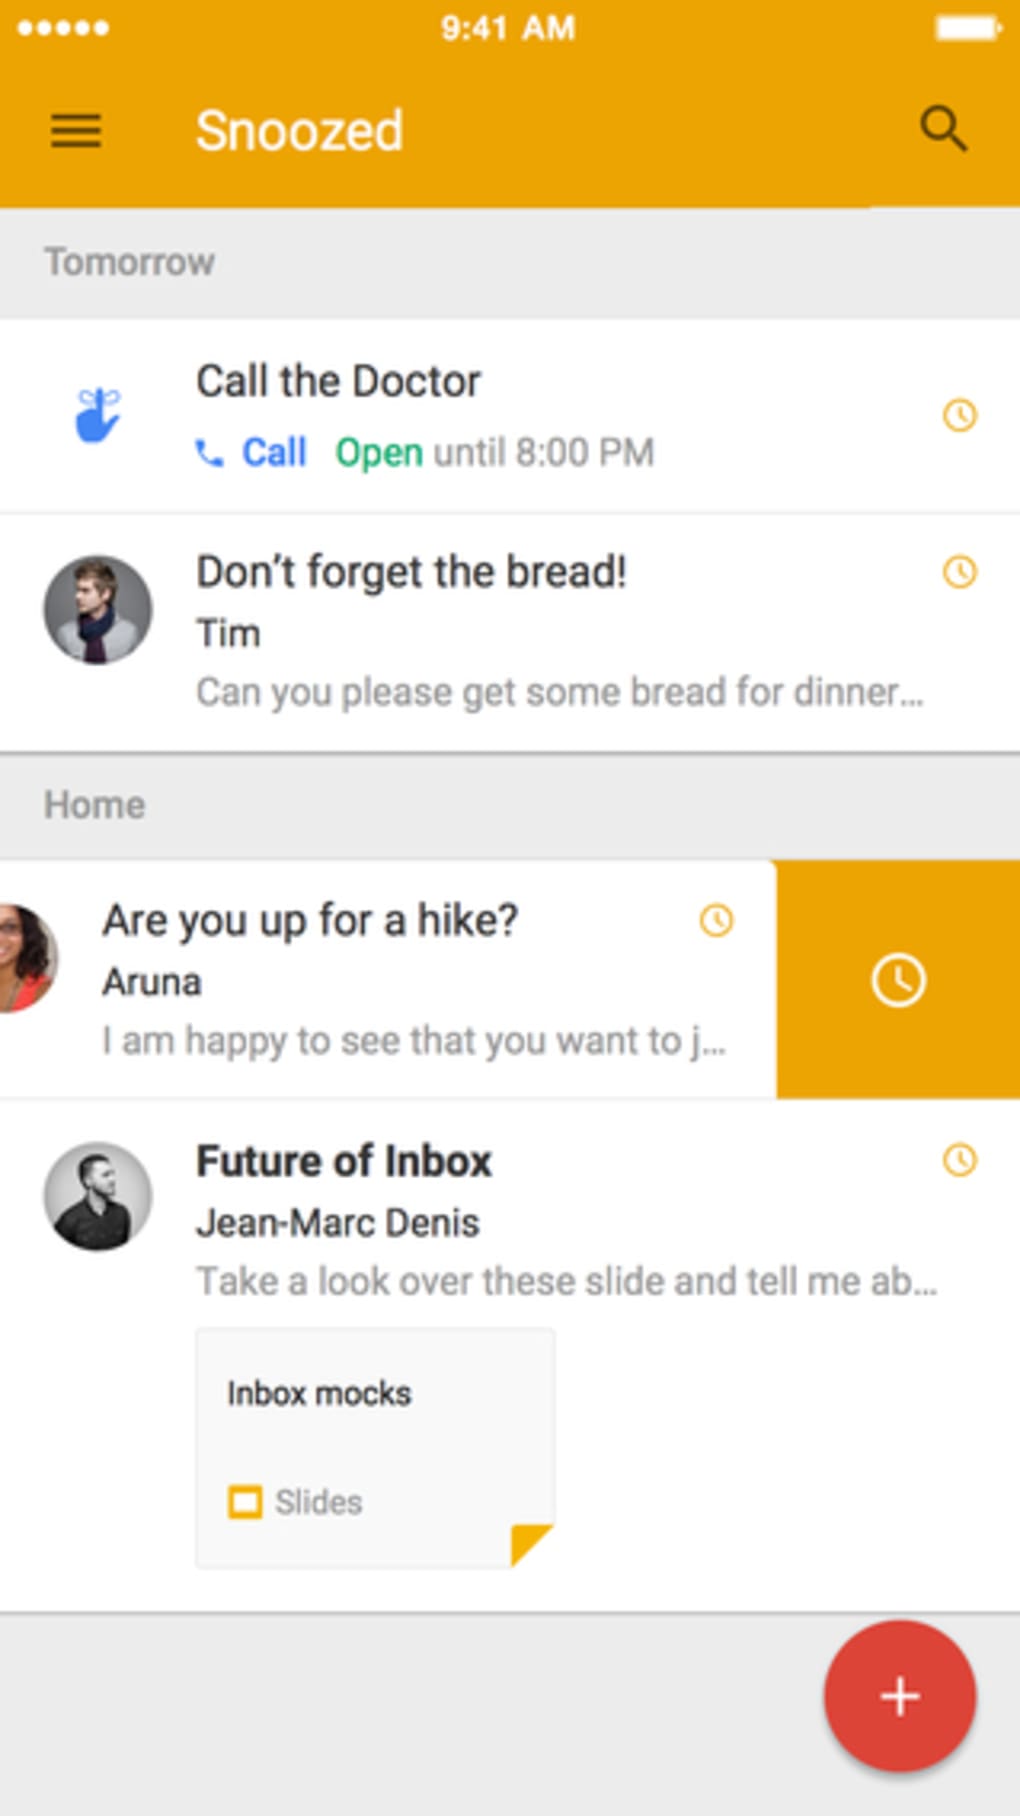 gmail inbox by gmail for mac